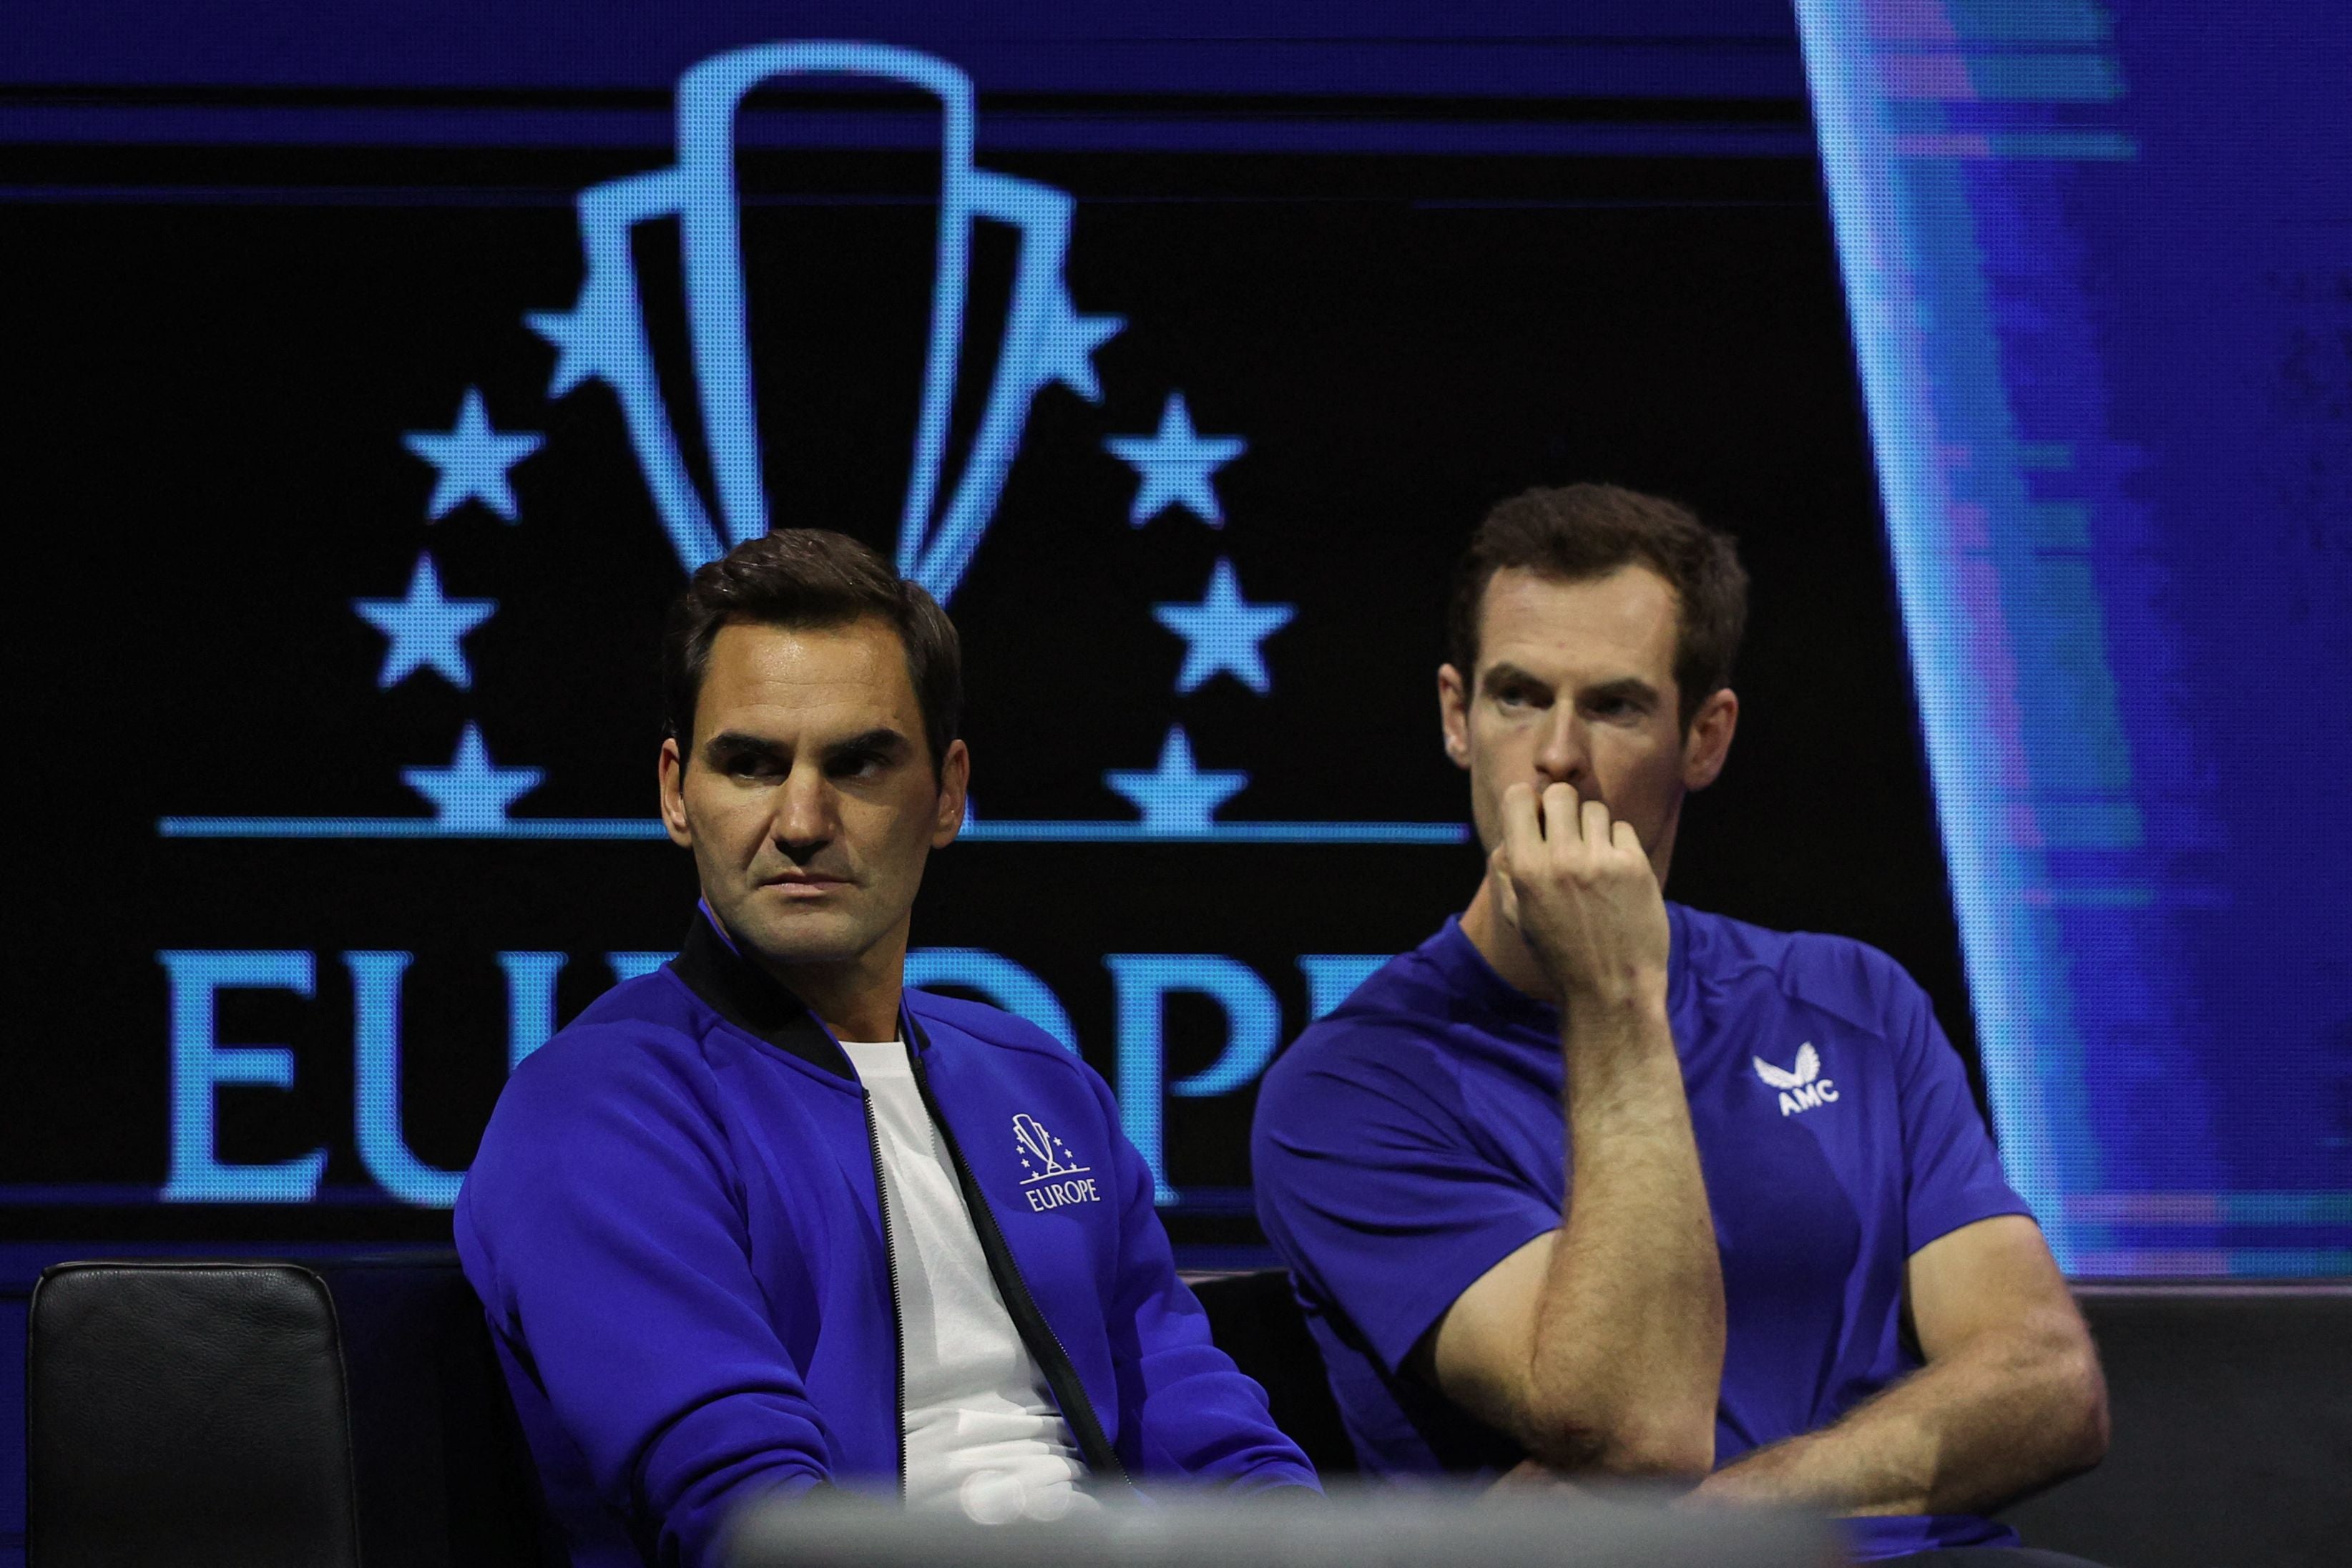 Roger Federer (left) retired from tennis at the 2022 Laver Cup